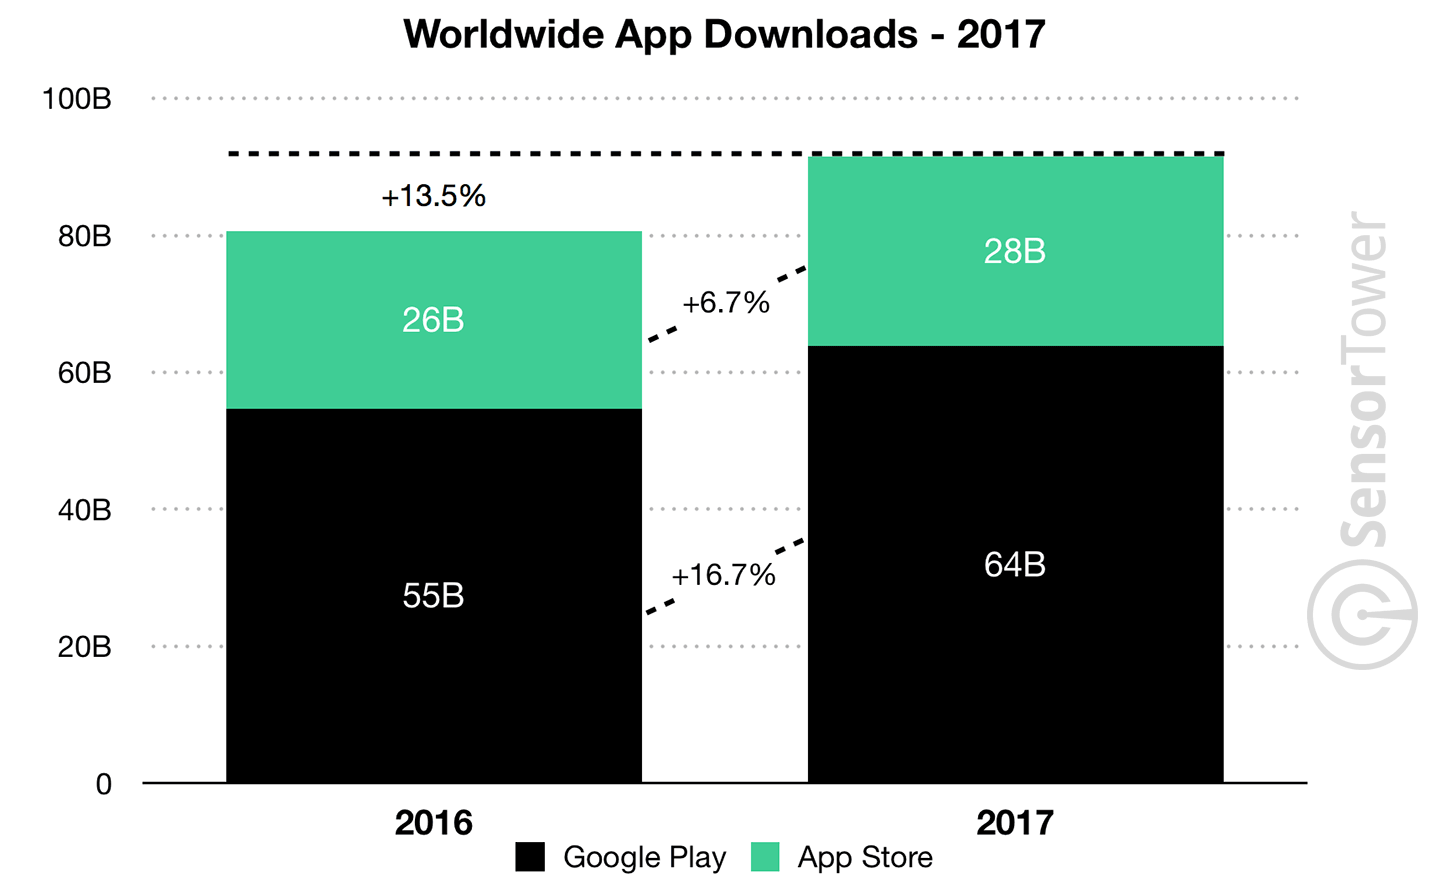 Google Play first-time app installs surpassed App Store's by more than double in 2017